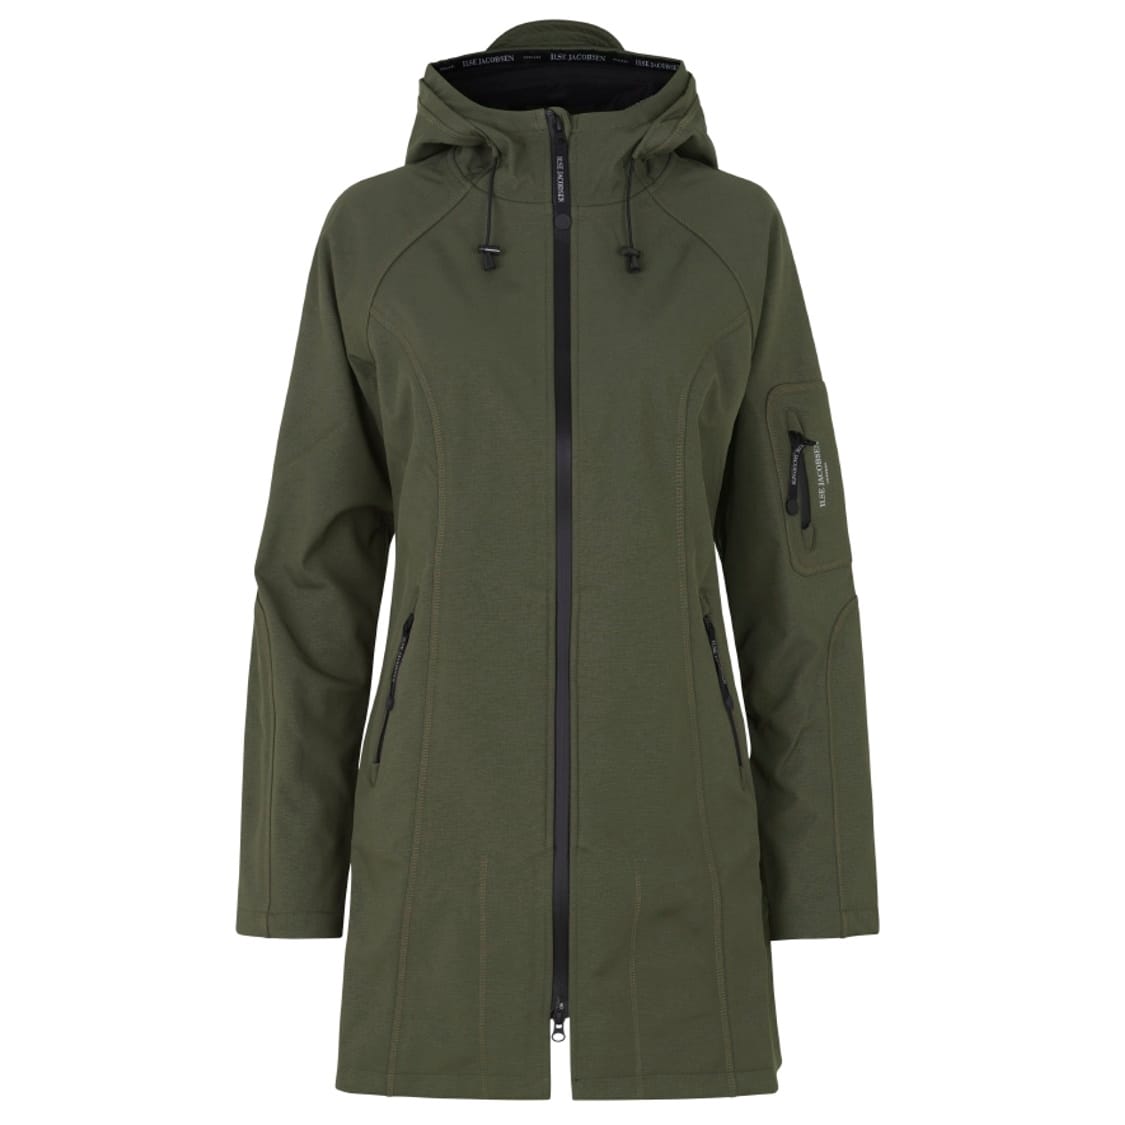 Buy Ilse Jacobsen Women's 3/4 Raincoat from Outnorth